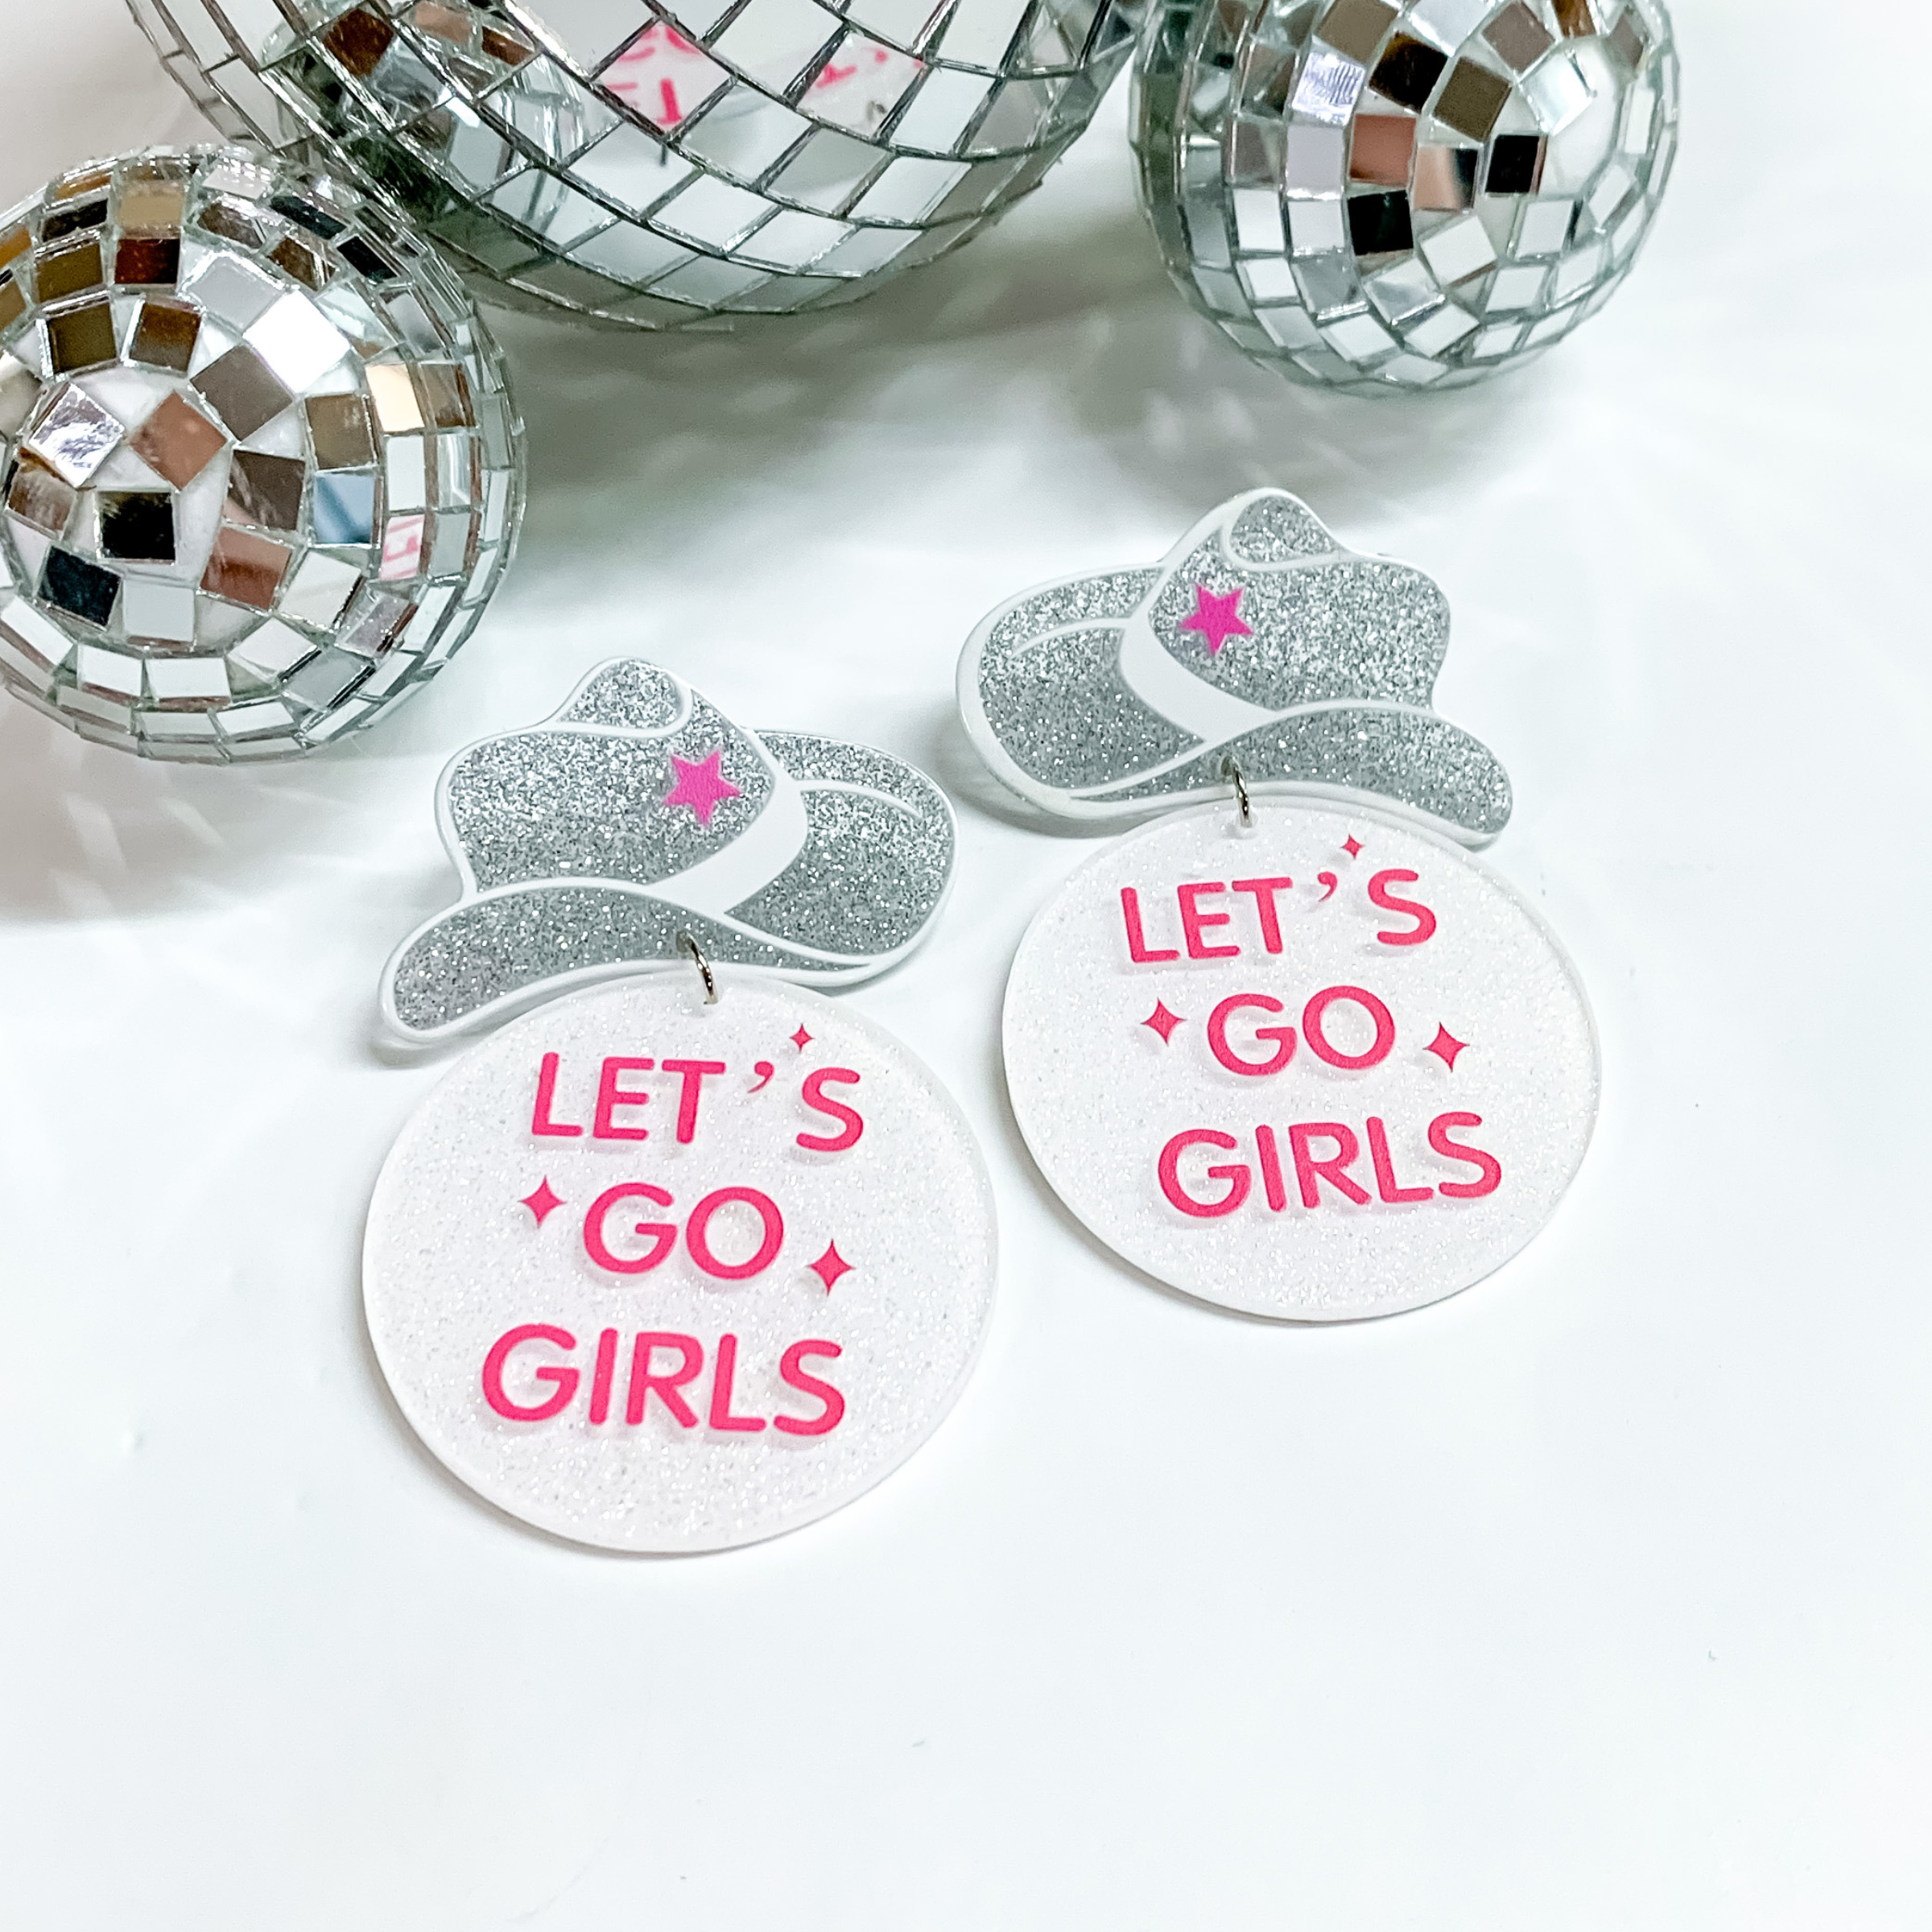 Silver glitter cowboy hat earrings with a white glitter circle drop. The saying "LET'S GO GIRLS" is printed in pink on the circle dorp. These earring are pictured on a white background with disco balls at the top of the picture. 